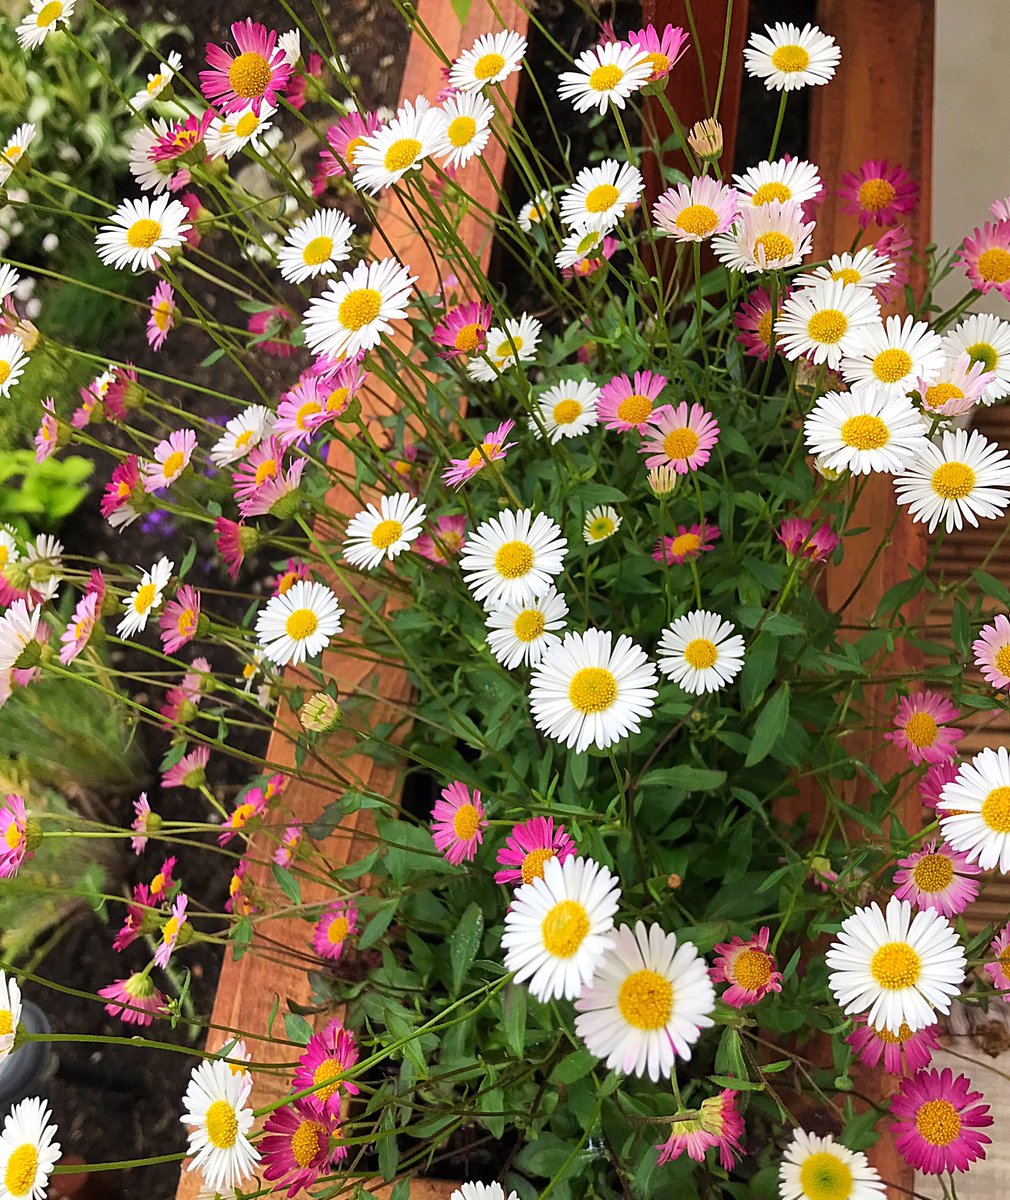 Love these wee daisies- white then turn pink - amazing. #naturehelps